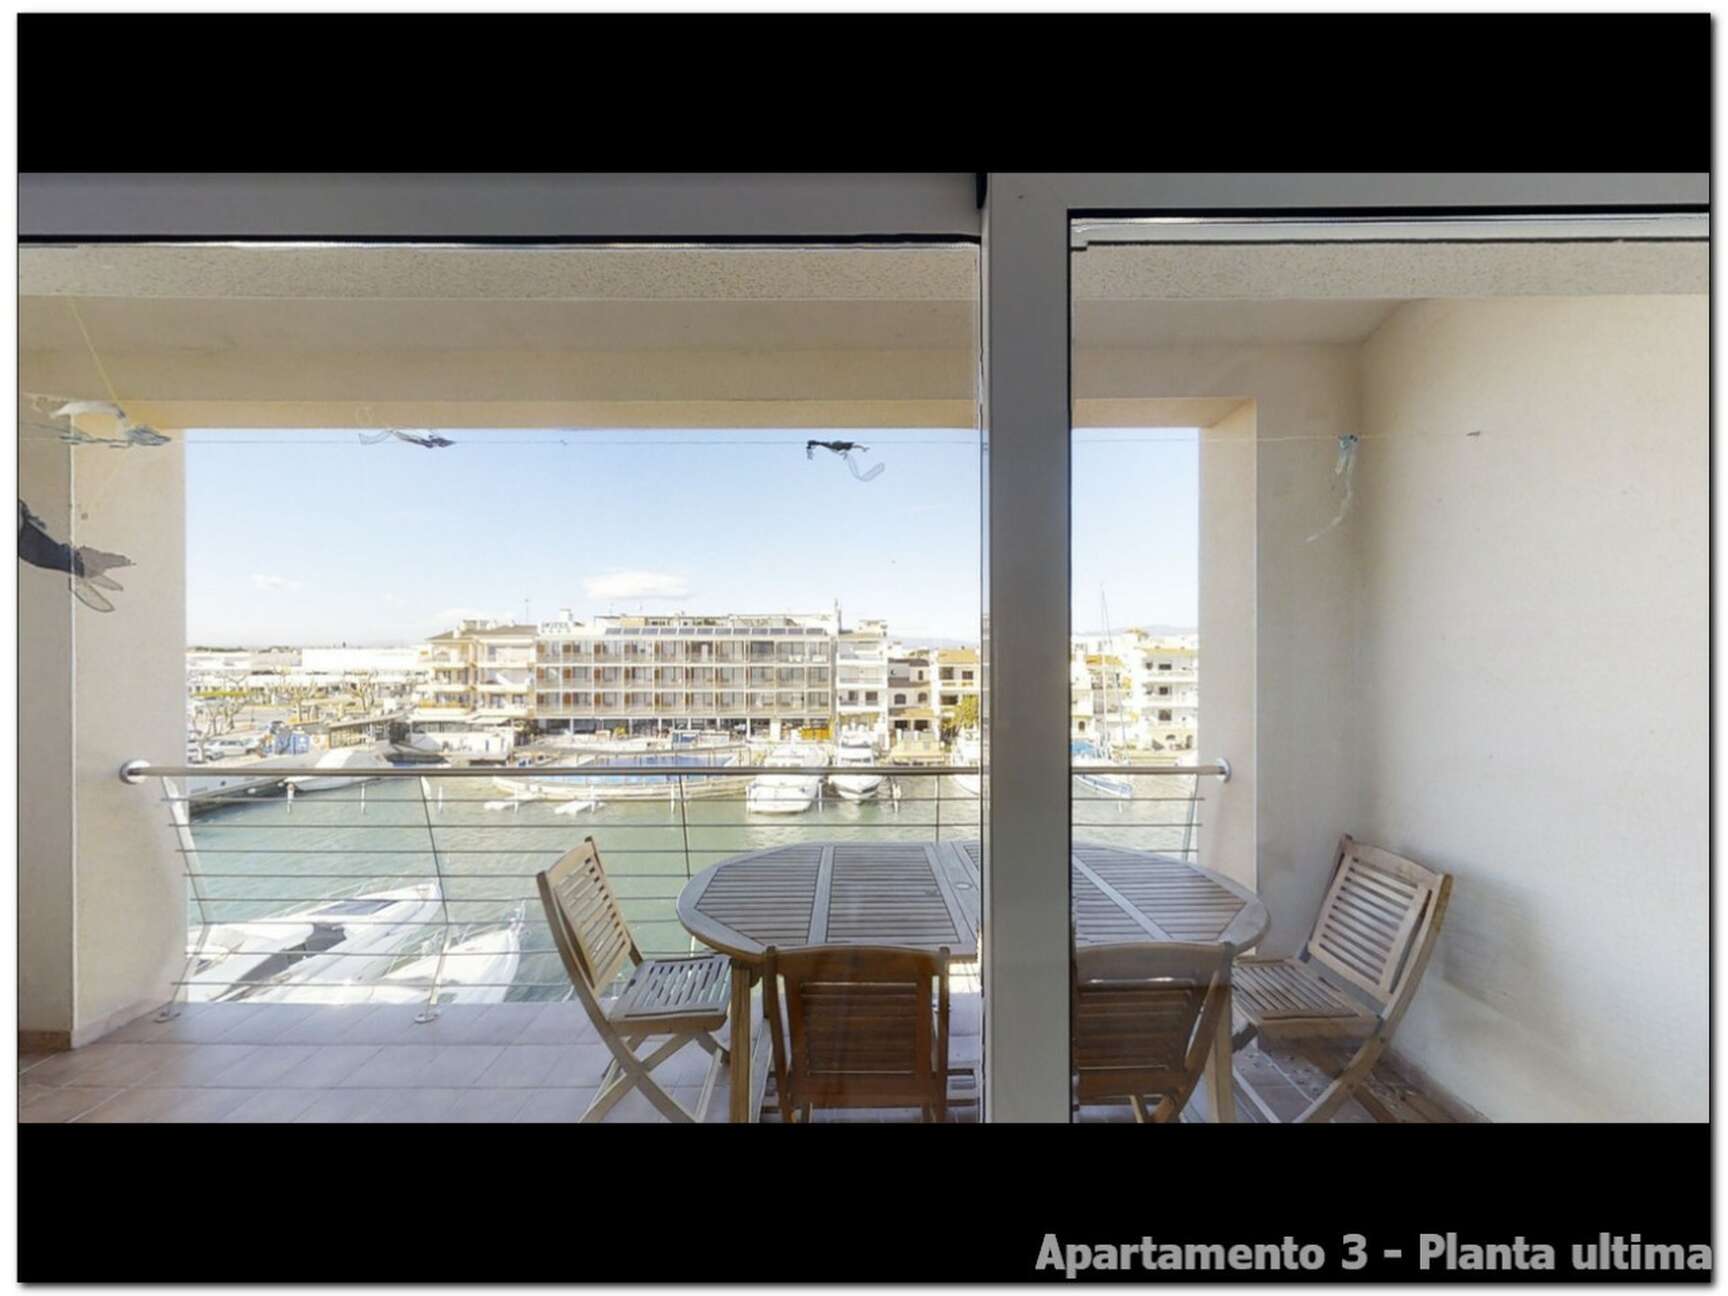 Building for sale Empuriabrava, 3 flats, large garage and mooring of 20x6m.